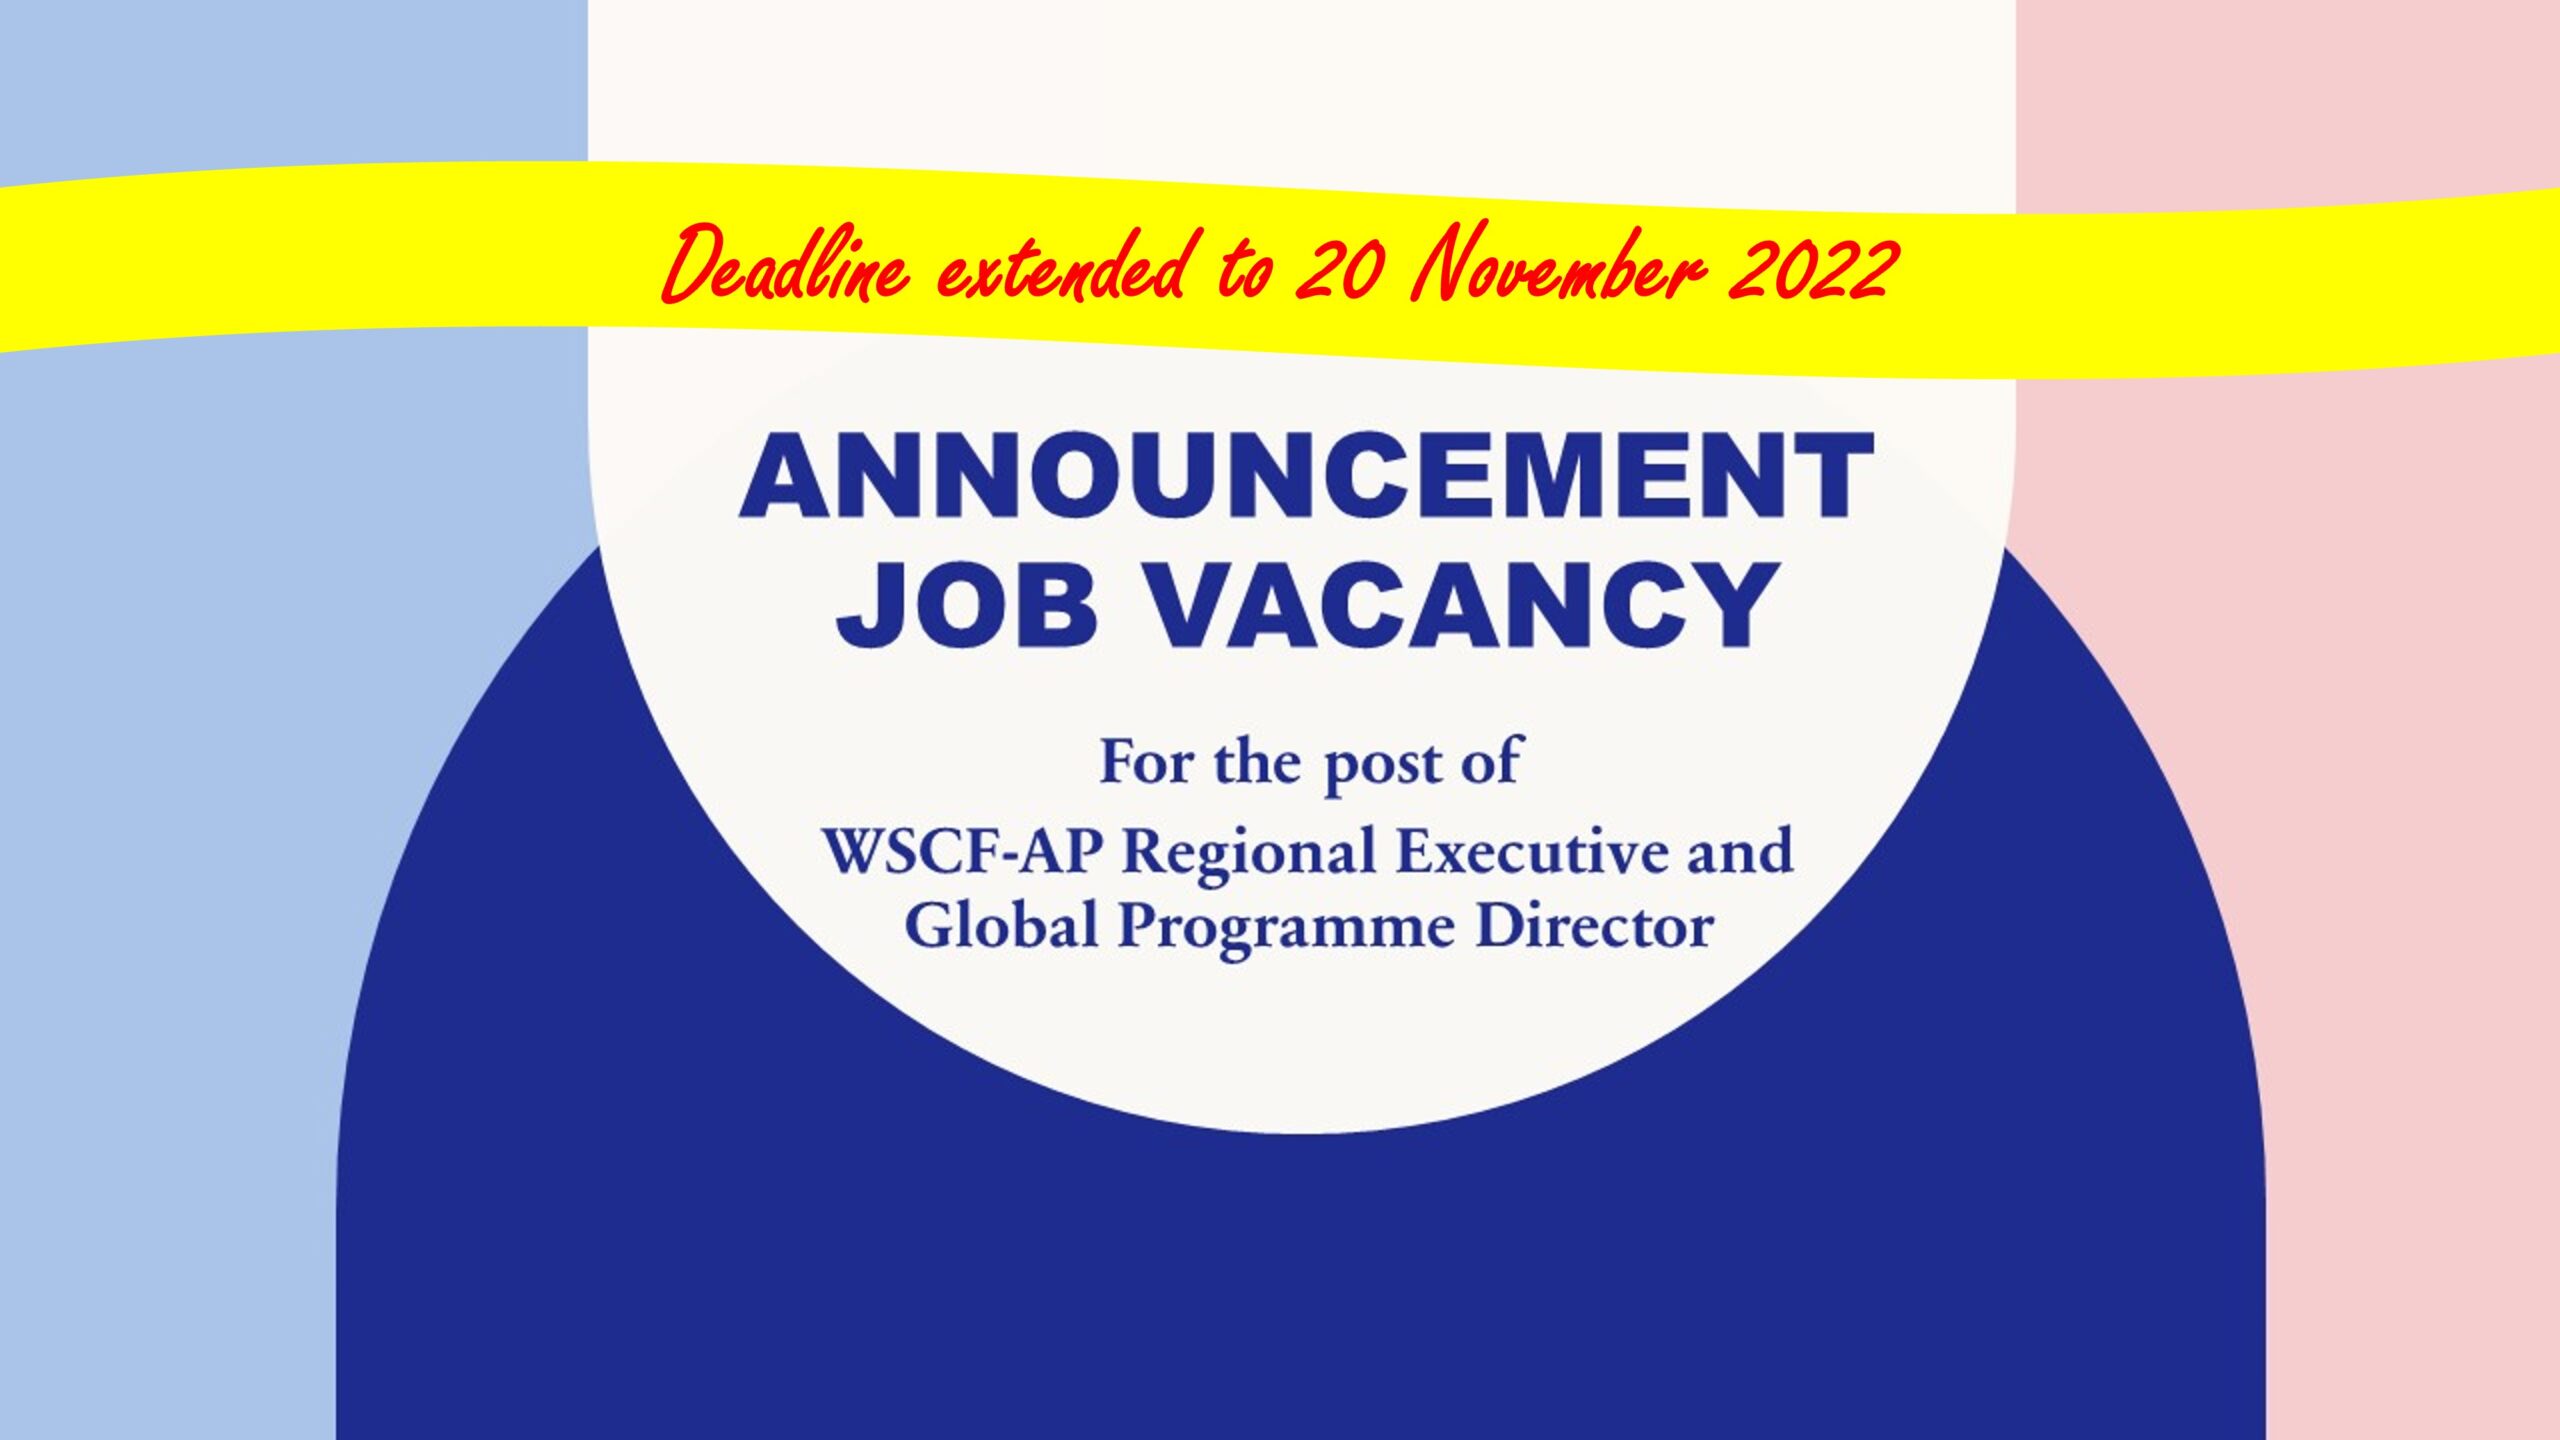 DEADLINE EXTENSION: ANNOUNCEMENT: WSCF-AP Job Vacancy for Regional Executive and Global Programme Director